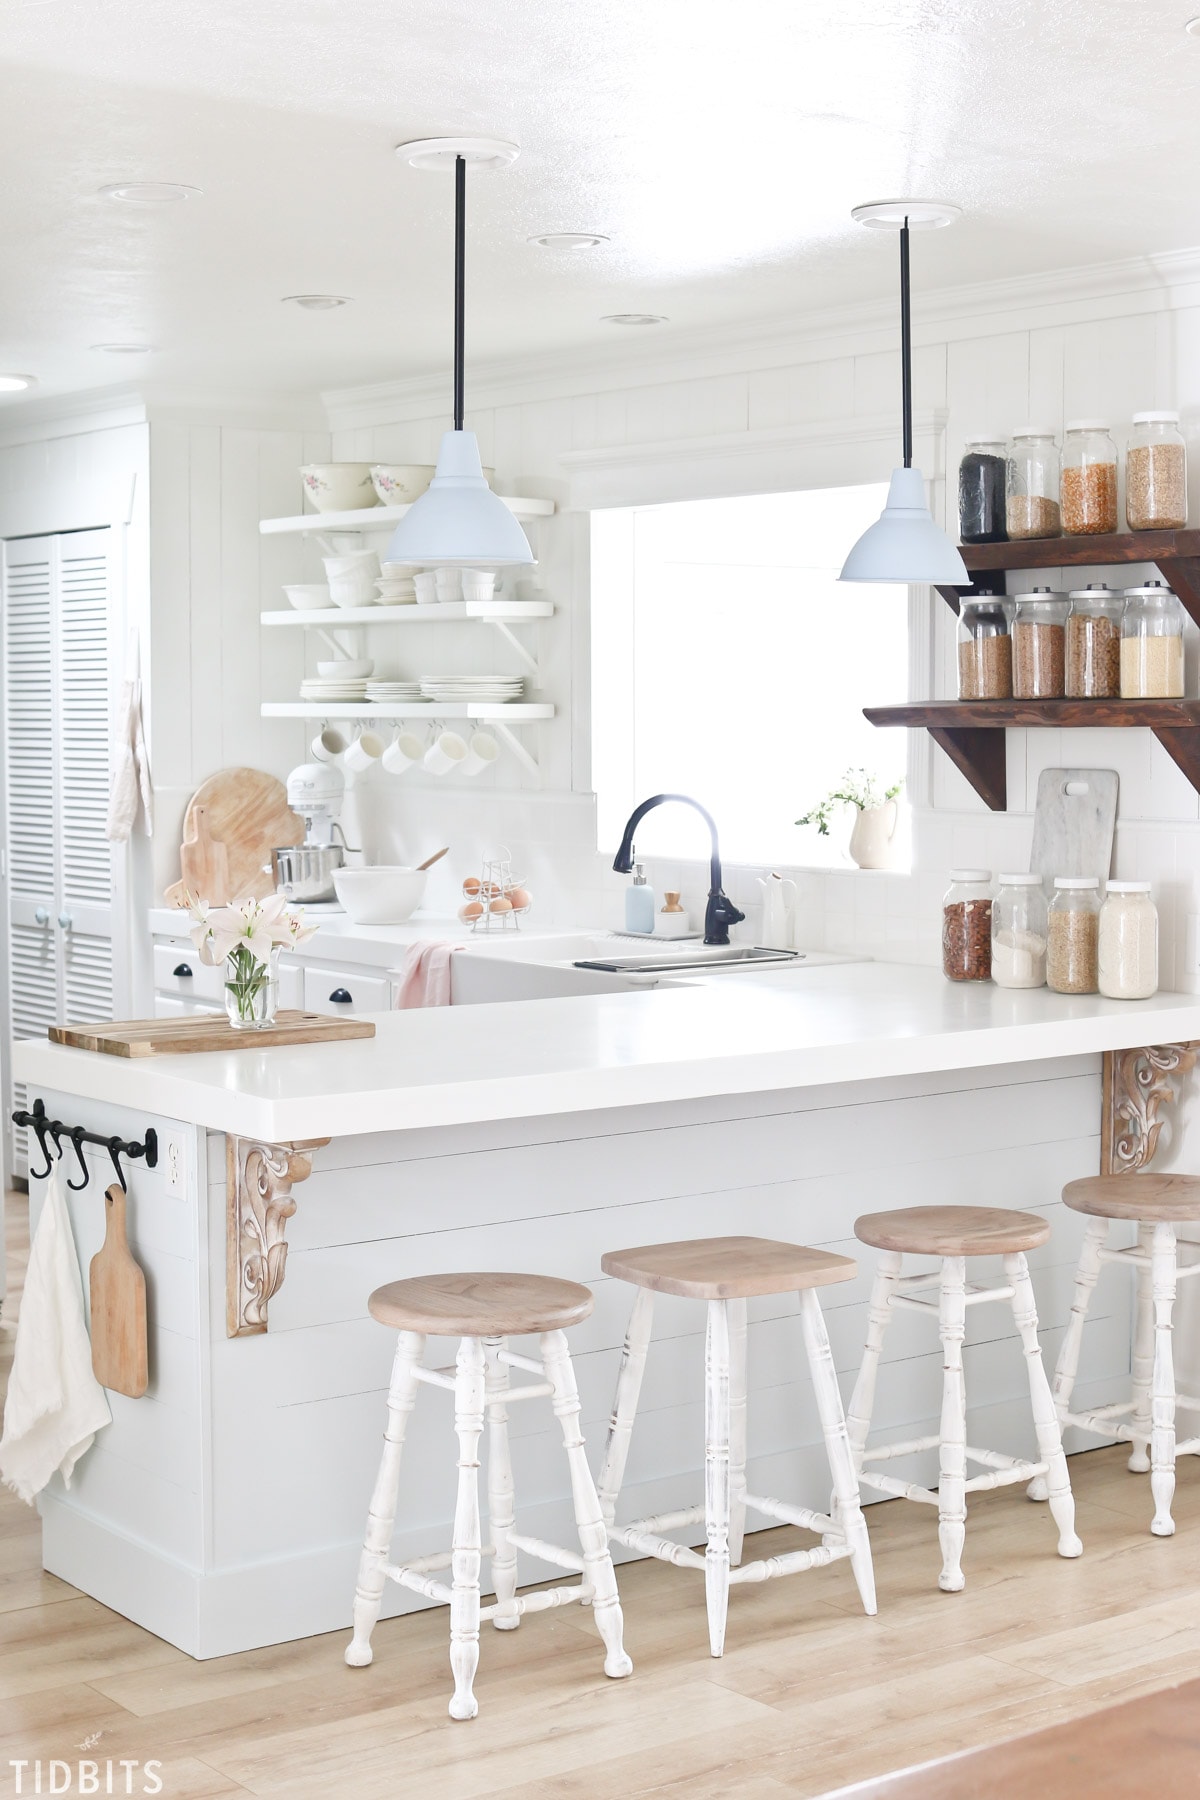 A cottage farmhouse kitchen Spring refresh by TIDBITS